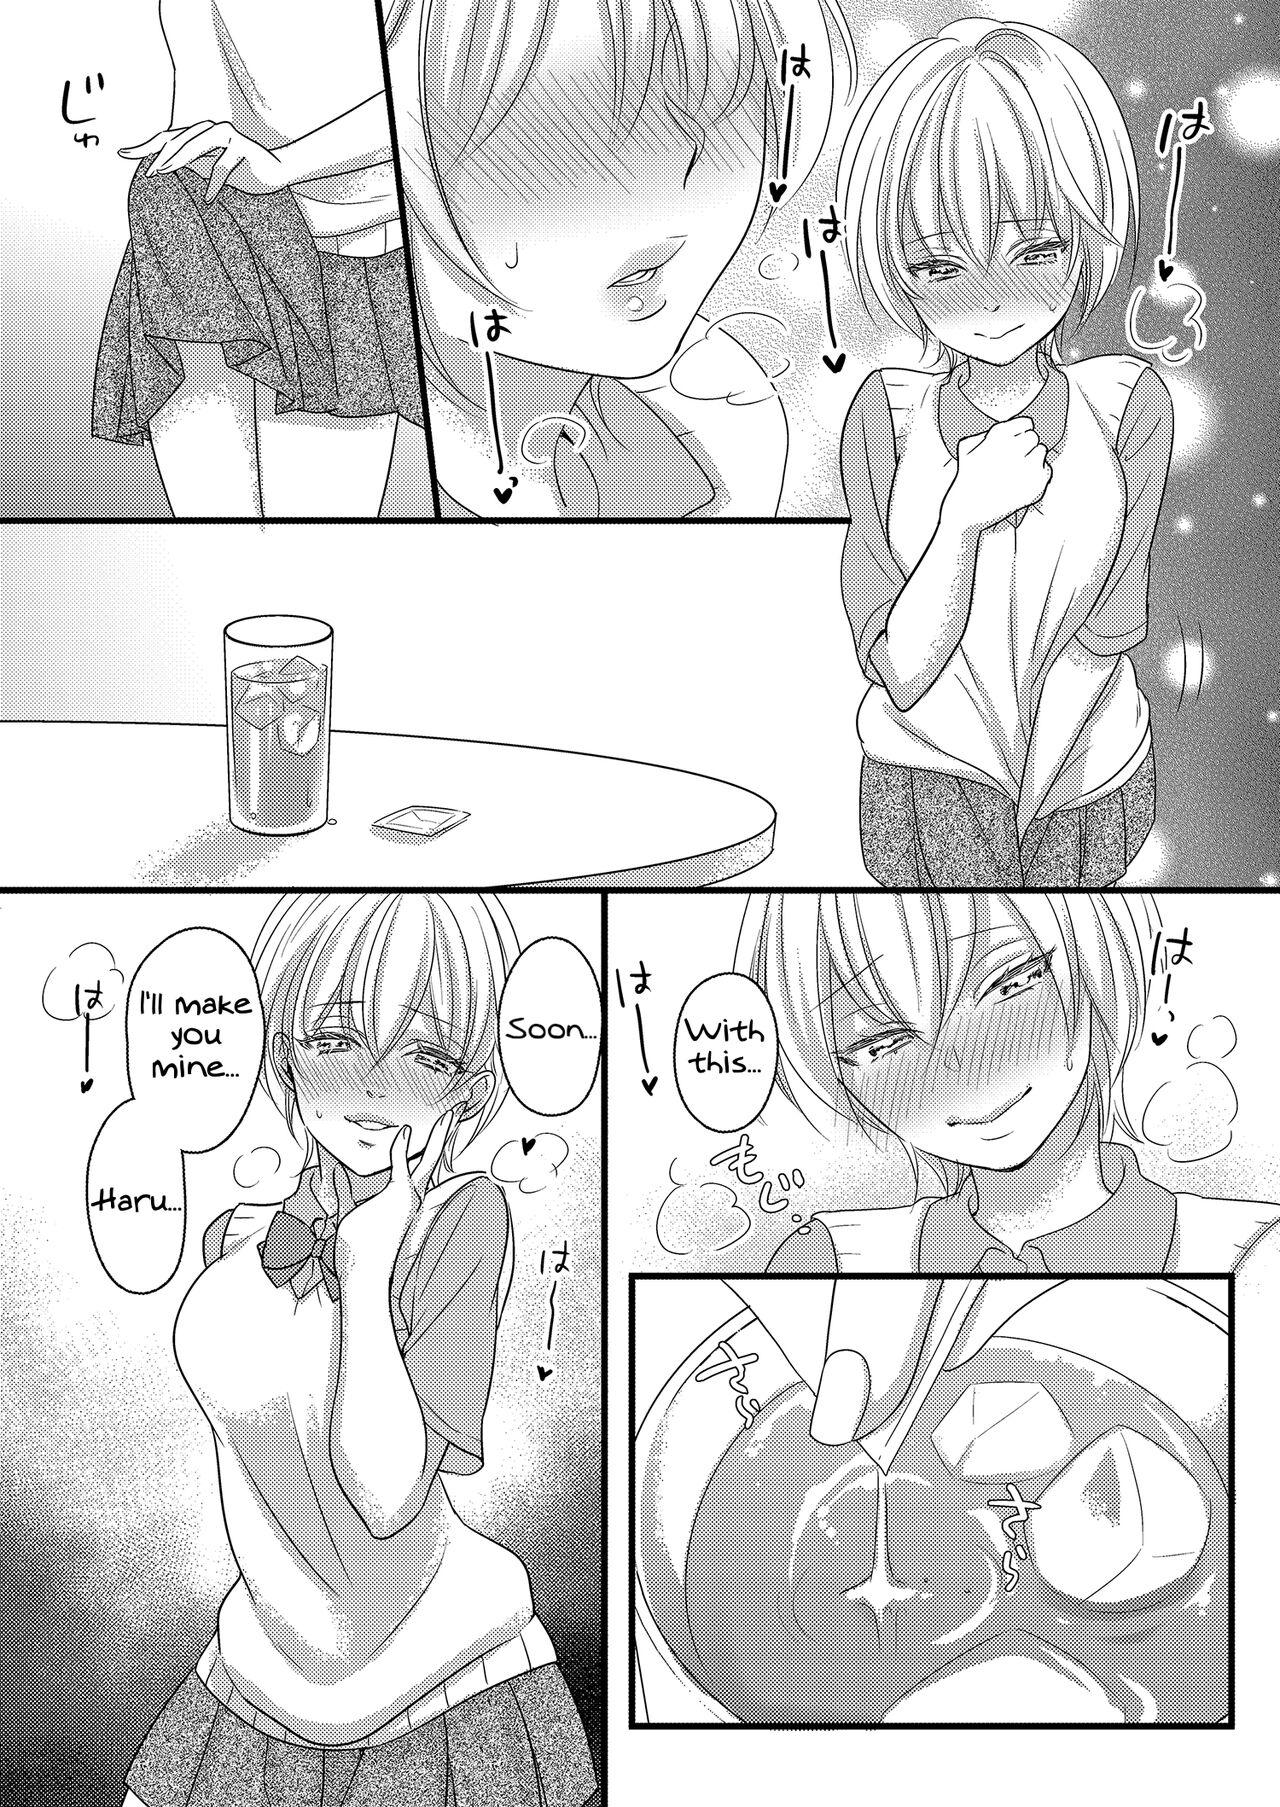 Perverted Haru and Sana ～Love Connected Through Cosplay～ - Original Culo - Page 10